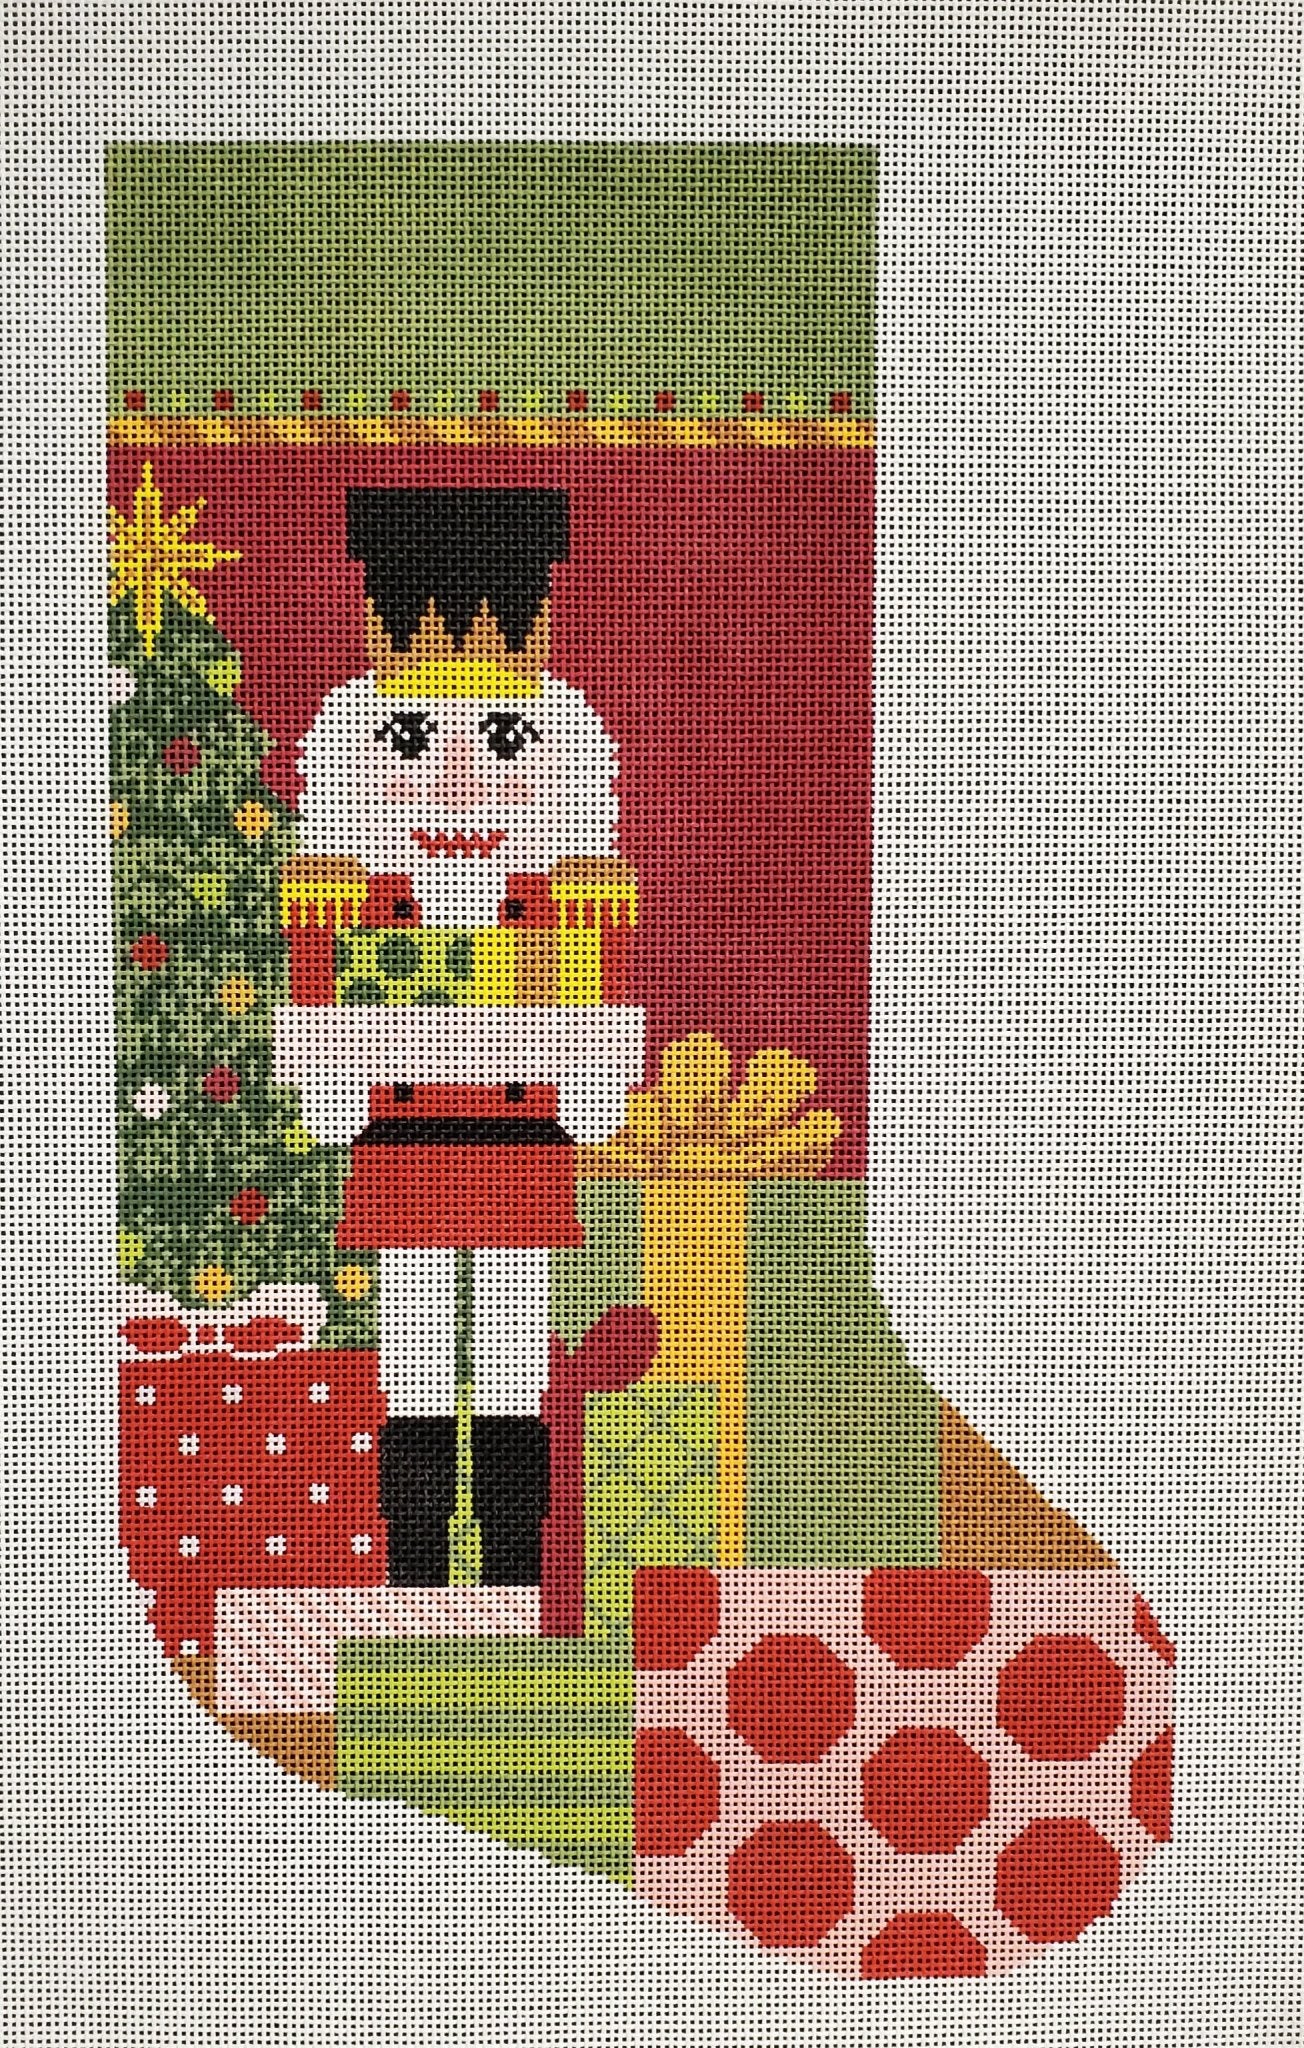 Load image into Gallery viewer, Nutcracker Stocking - The Flying Needles
